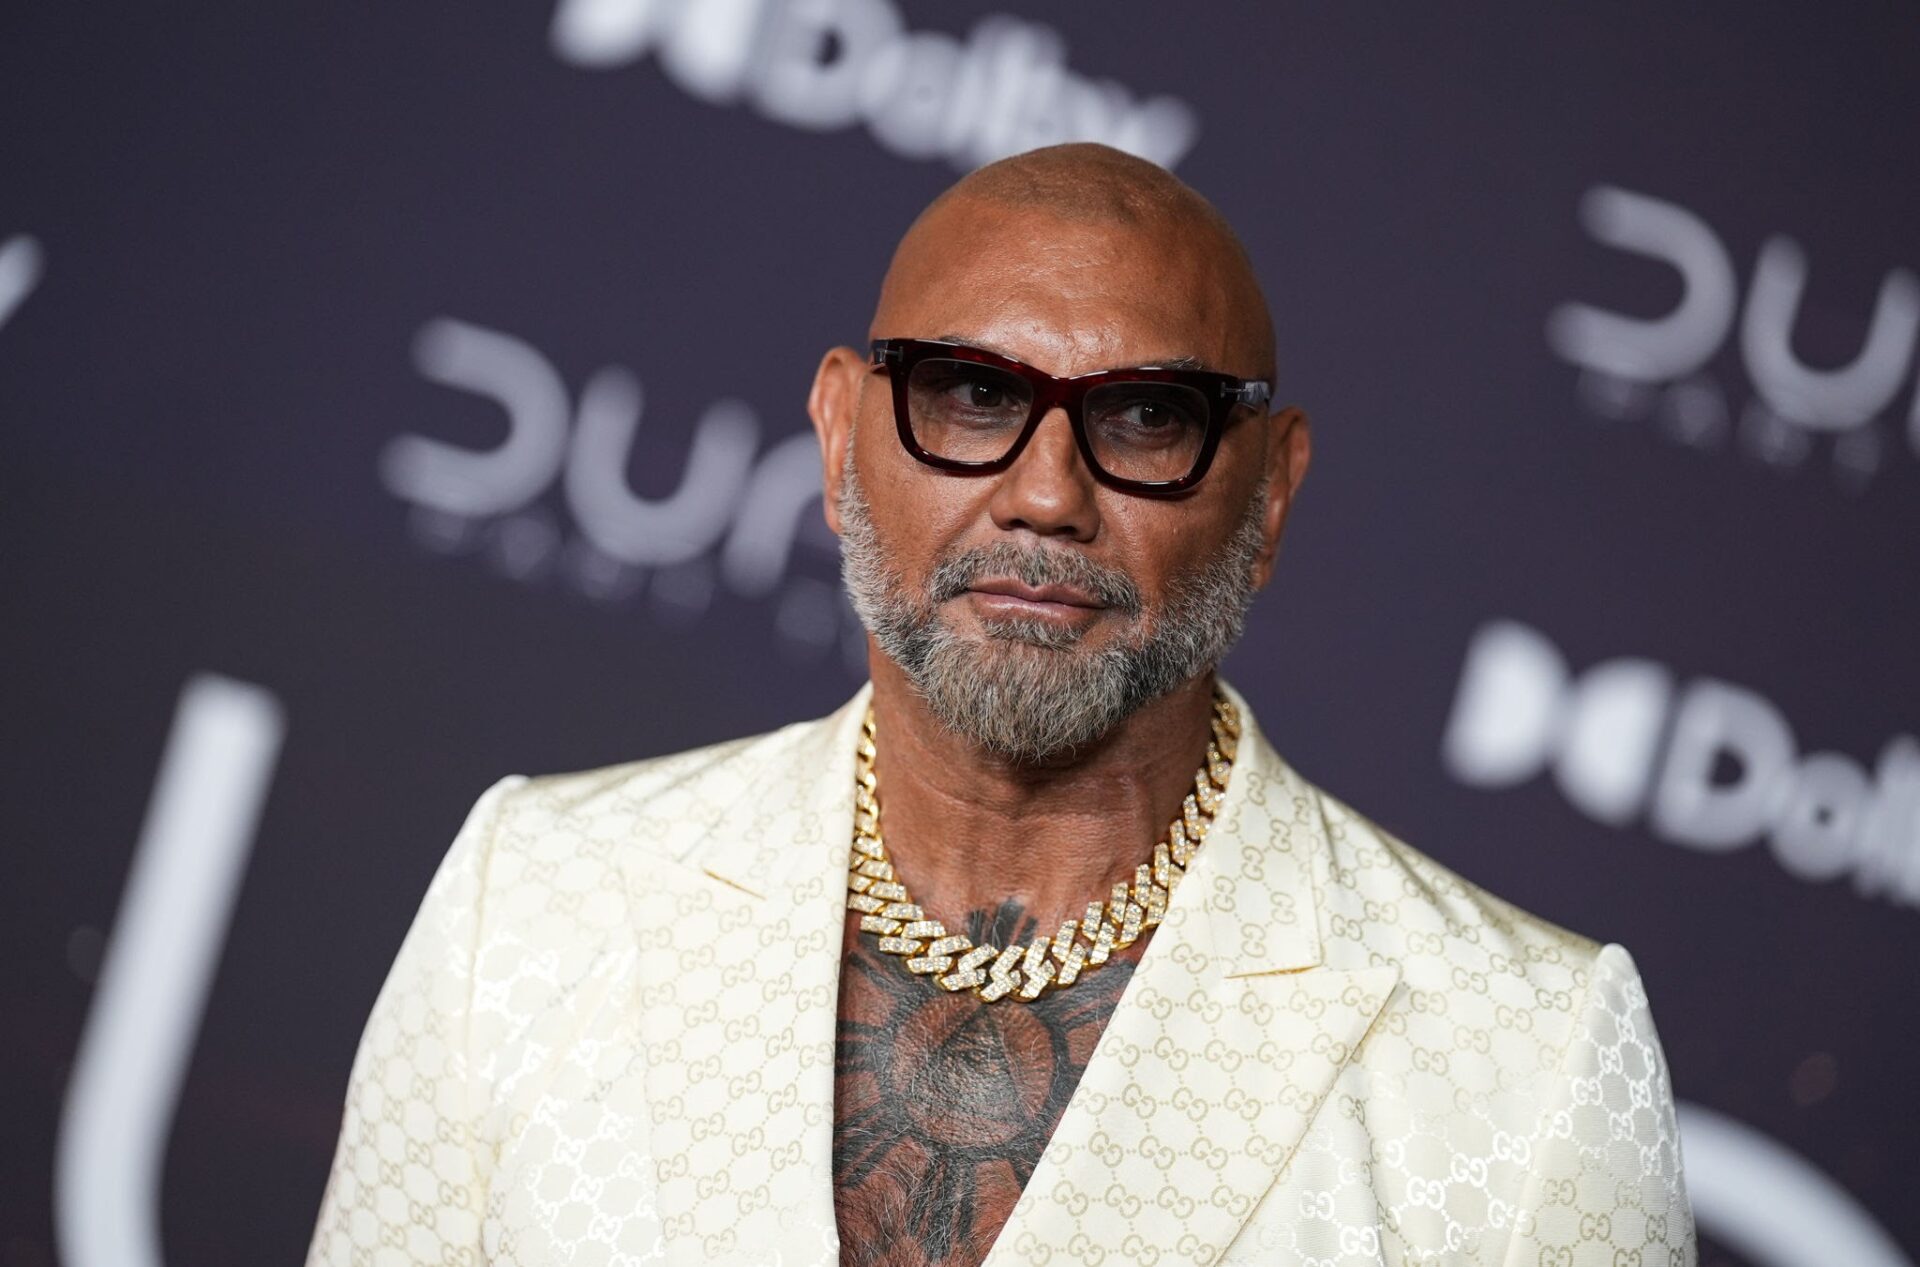 Dave Bautista Biography: Age, Net Worth, Height, Instagram, Wiki, Parents, Spouse, Siblings, Awards, Movies